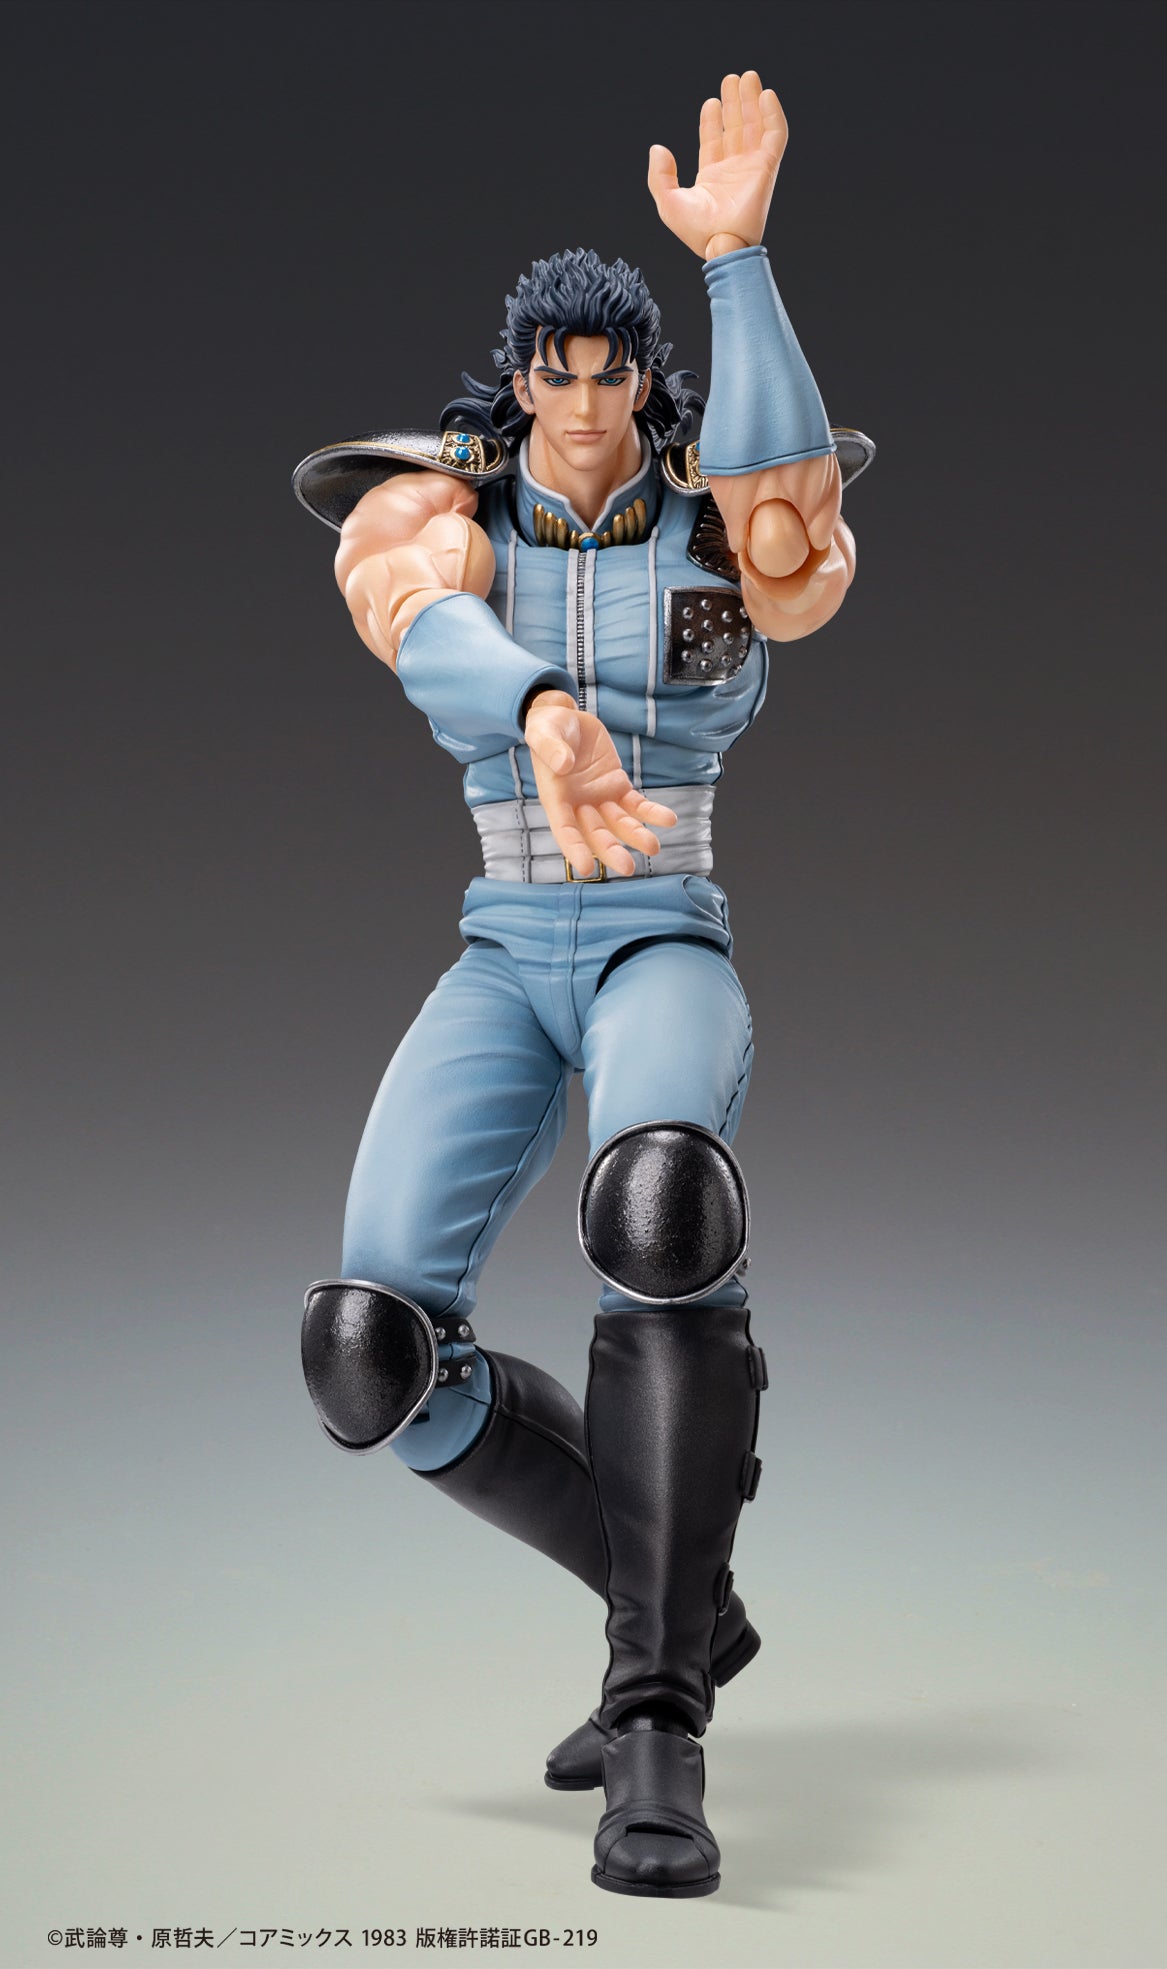 Super Action Statue "Fist of the North Star" Rei